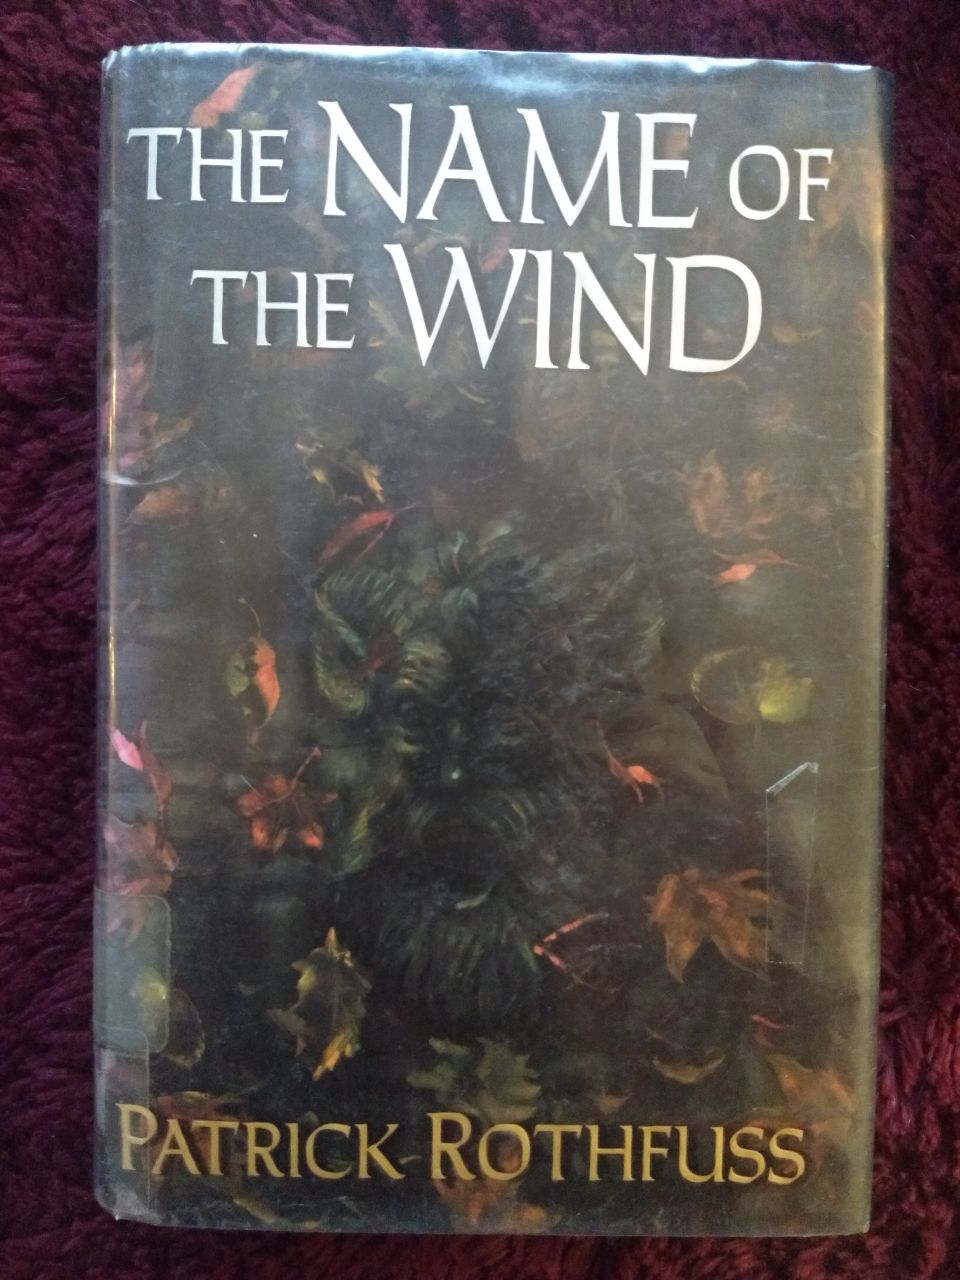 The Name of the Wind book cover